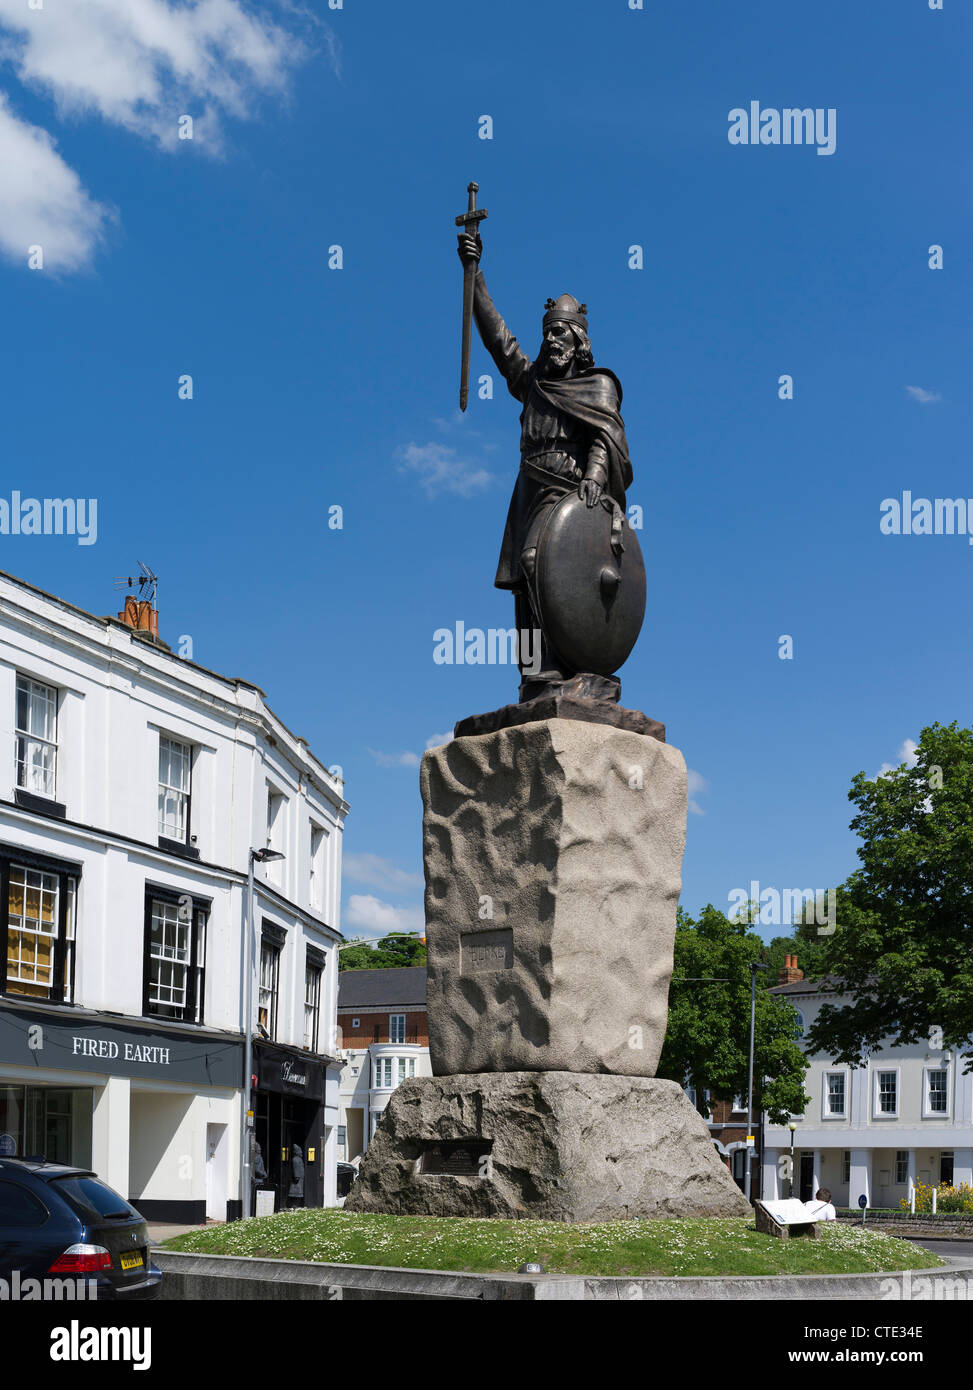 dh King Alfreds statue WINCHESTER HAMPSHIRE accueille le roi Alfred le Grande statue angleterre wessex royaume-uni Banque D'Images